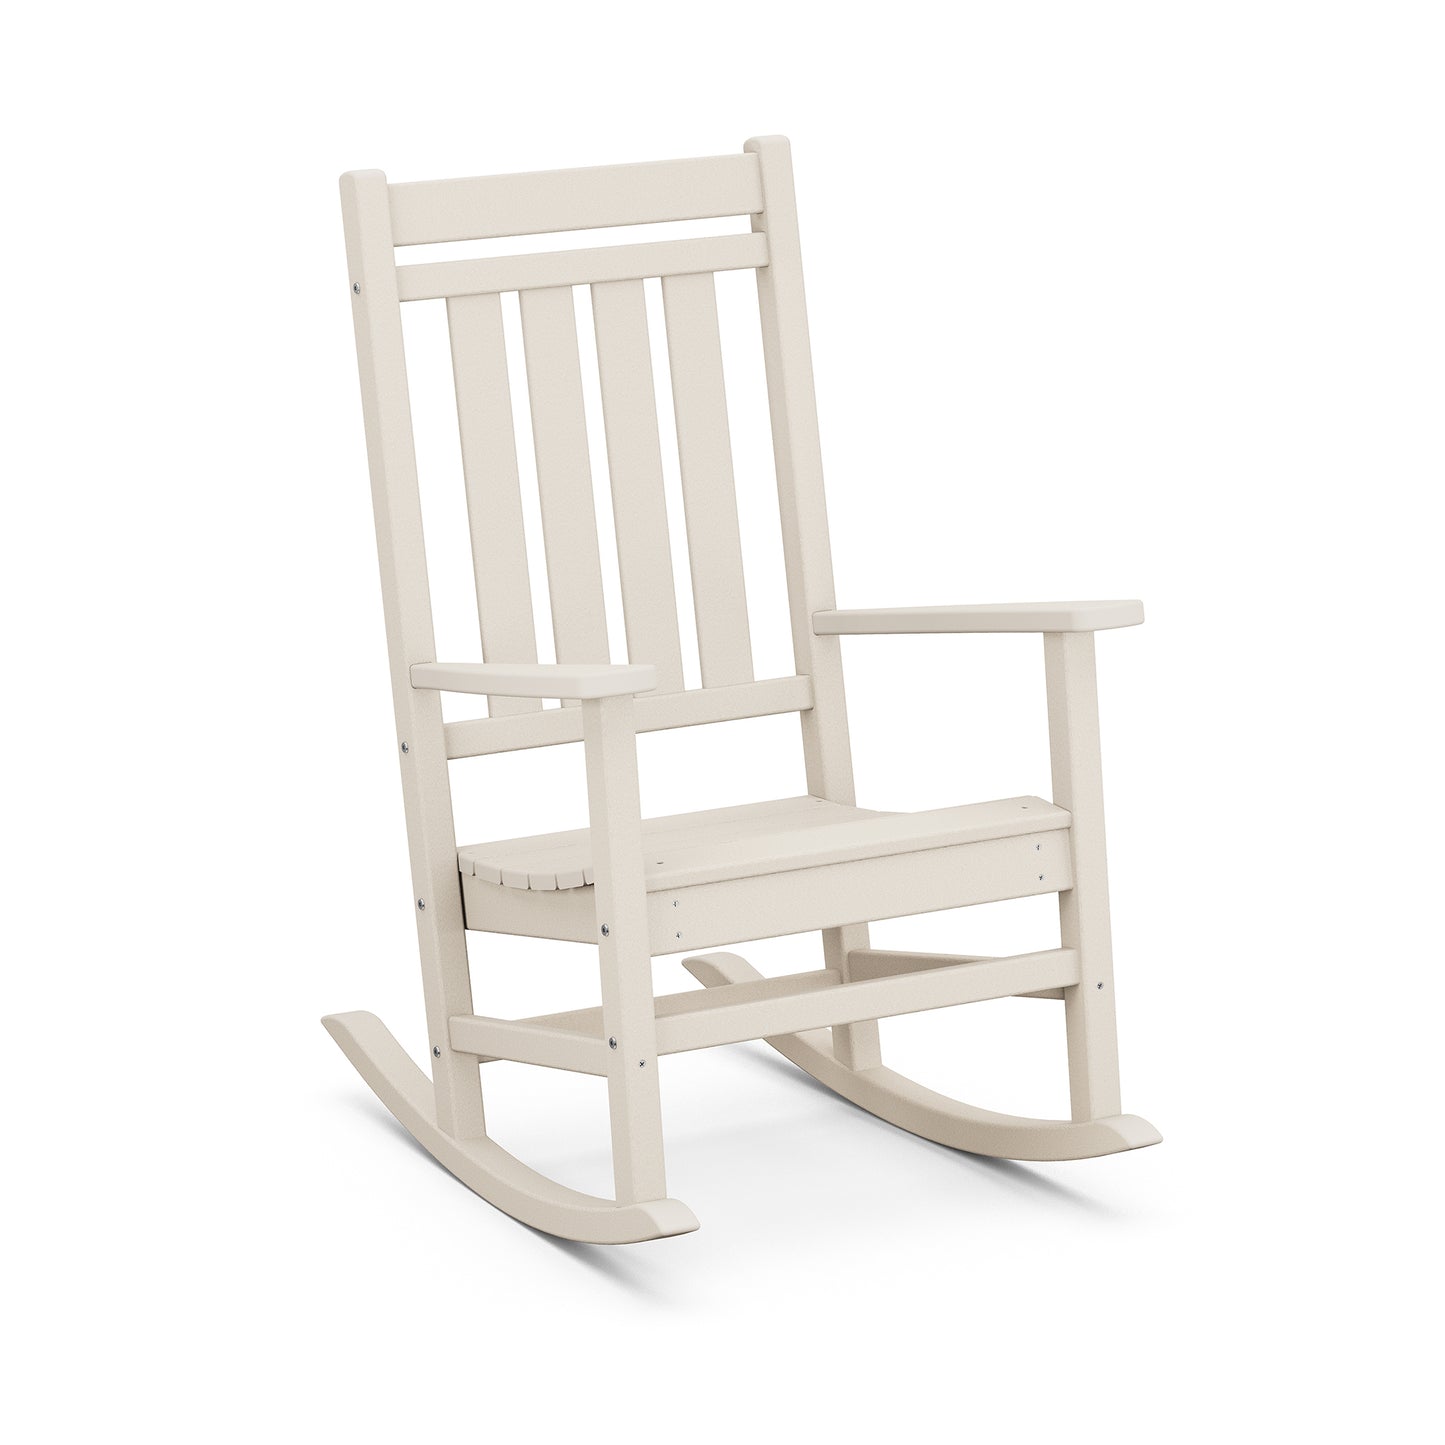 An off-white POLYWOOD Estate Rocking Chair with vertical slats on the backrest and an ergonomic seat, shown against a plain white background.